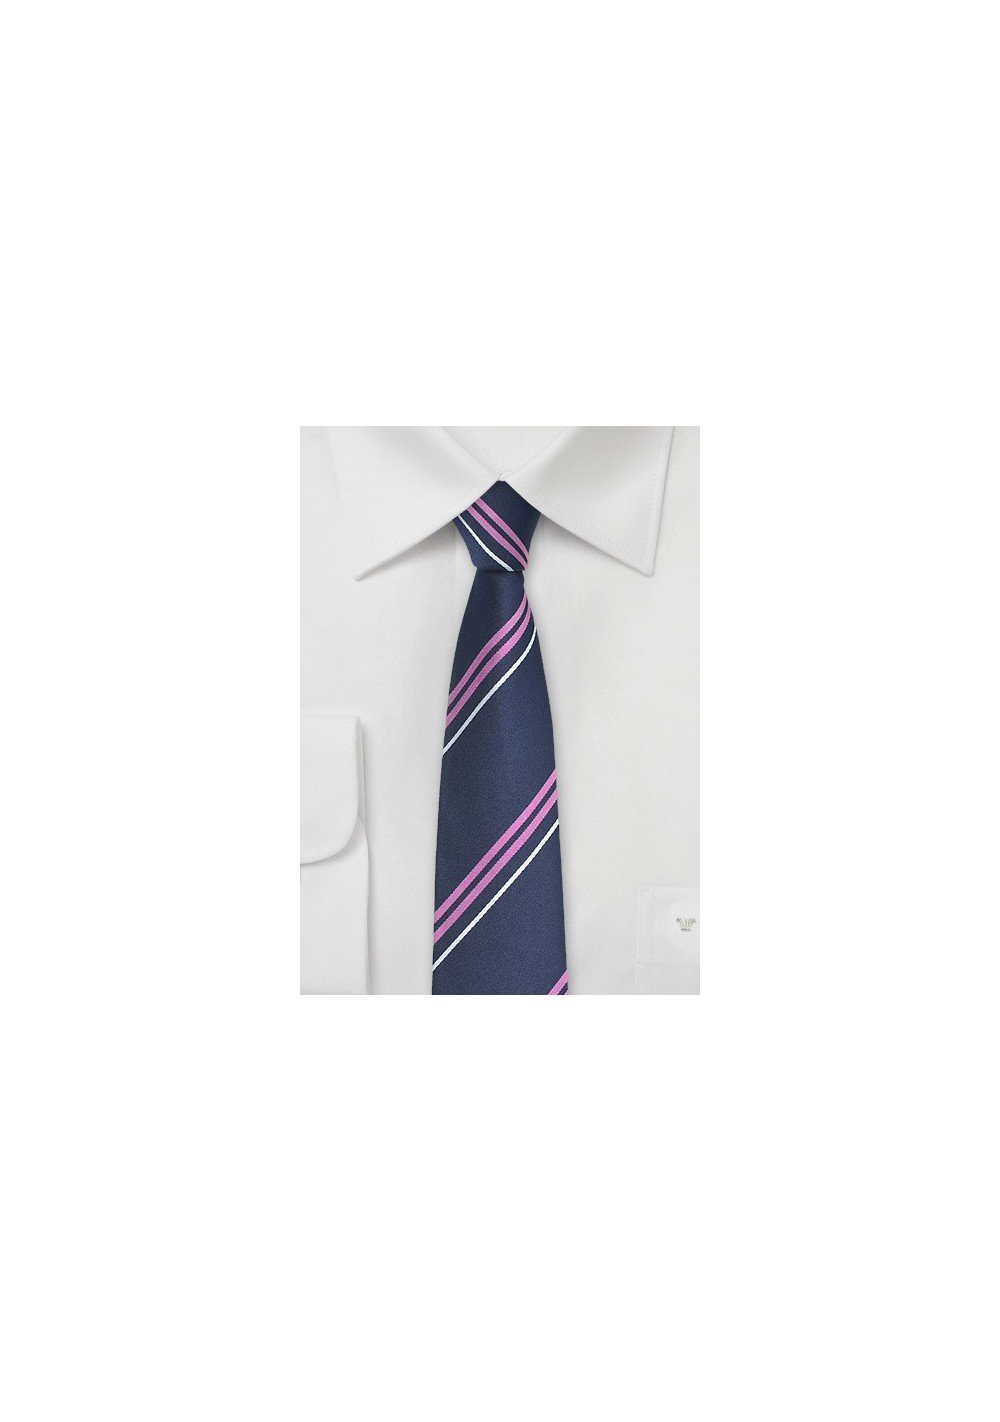 Trendy Blue Skinny Tie with Lavender and Silver STripes